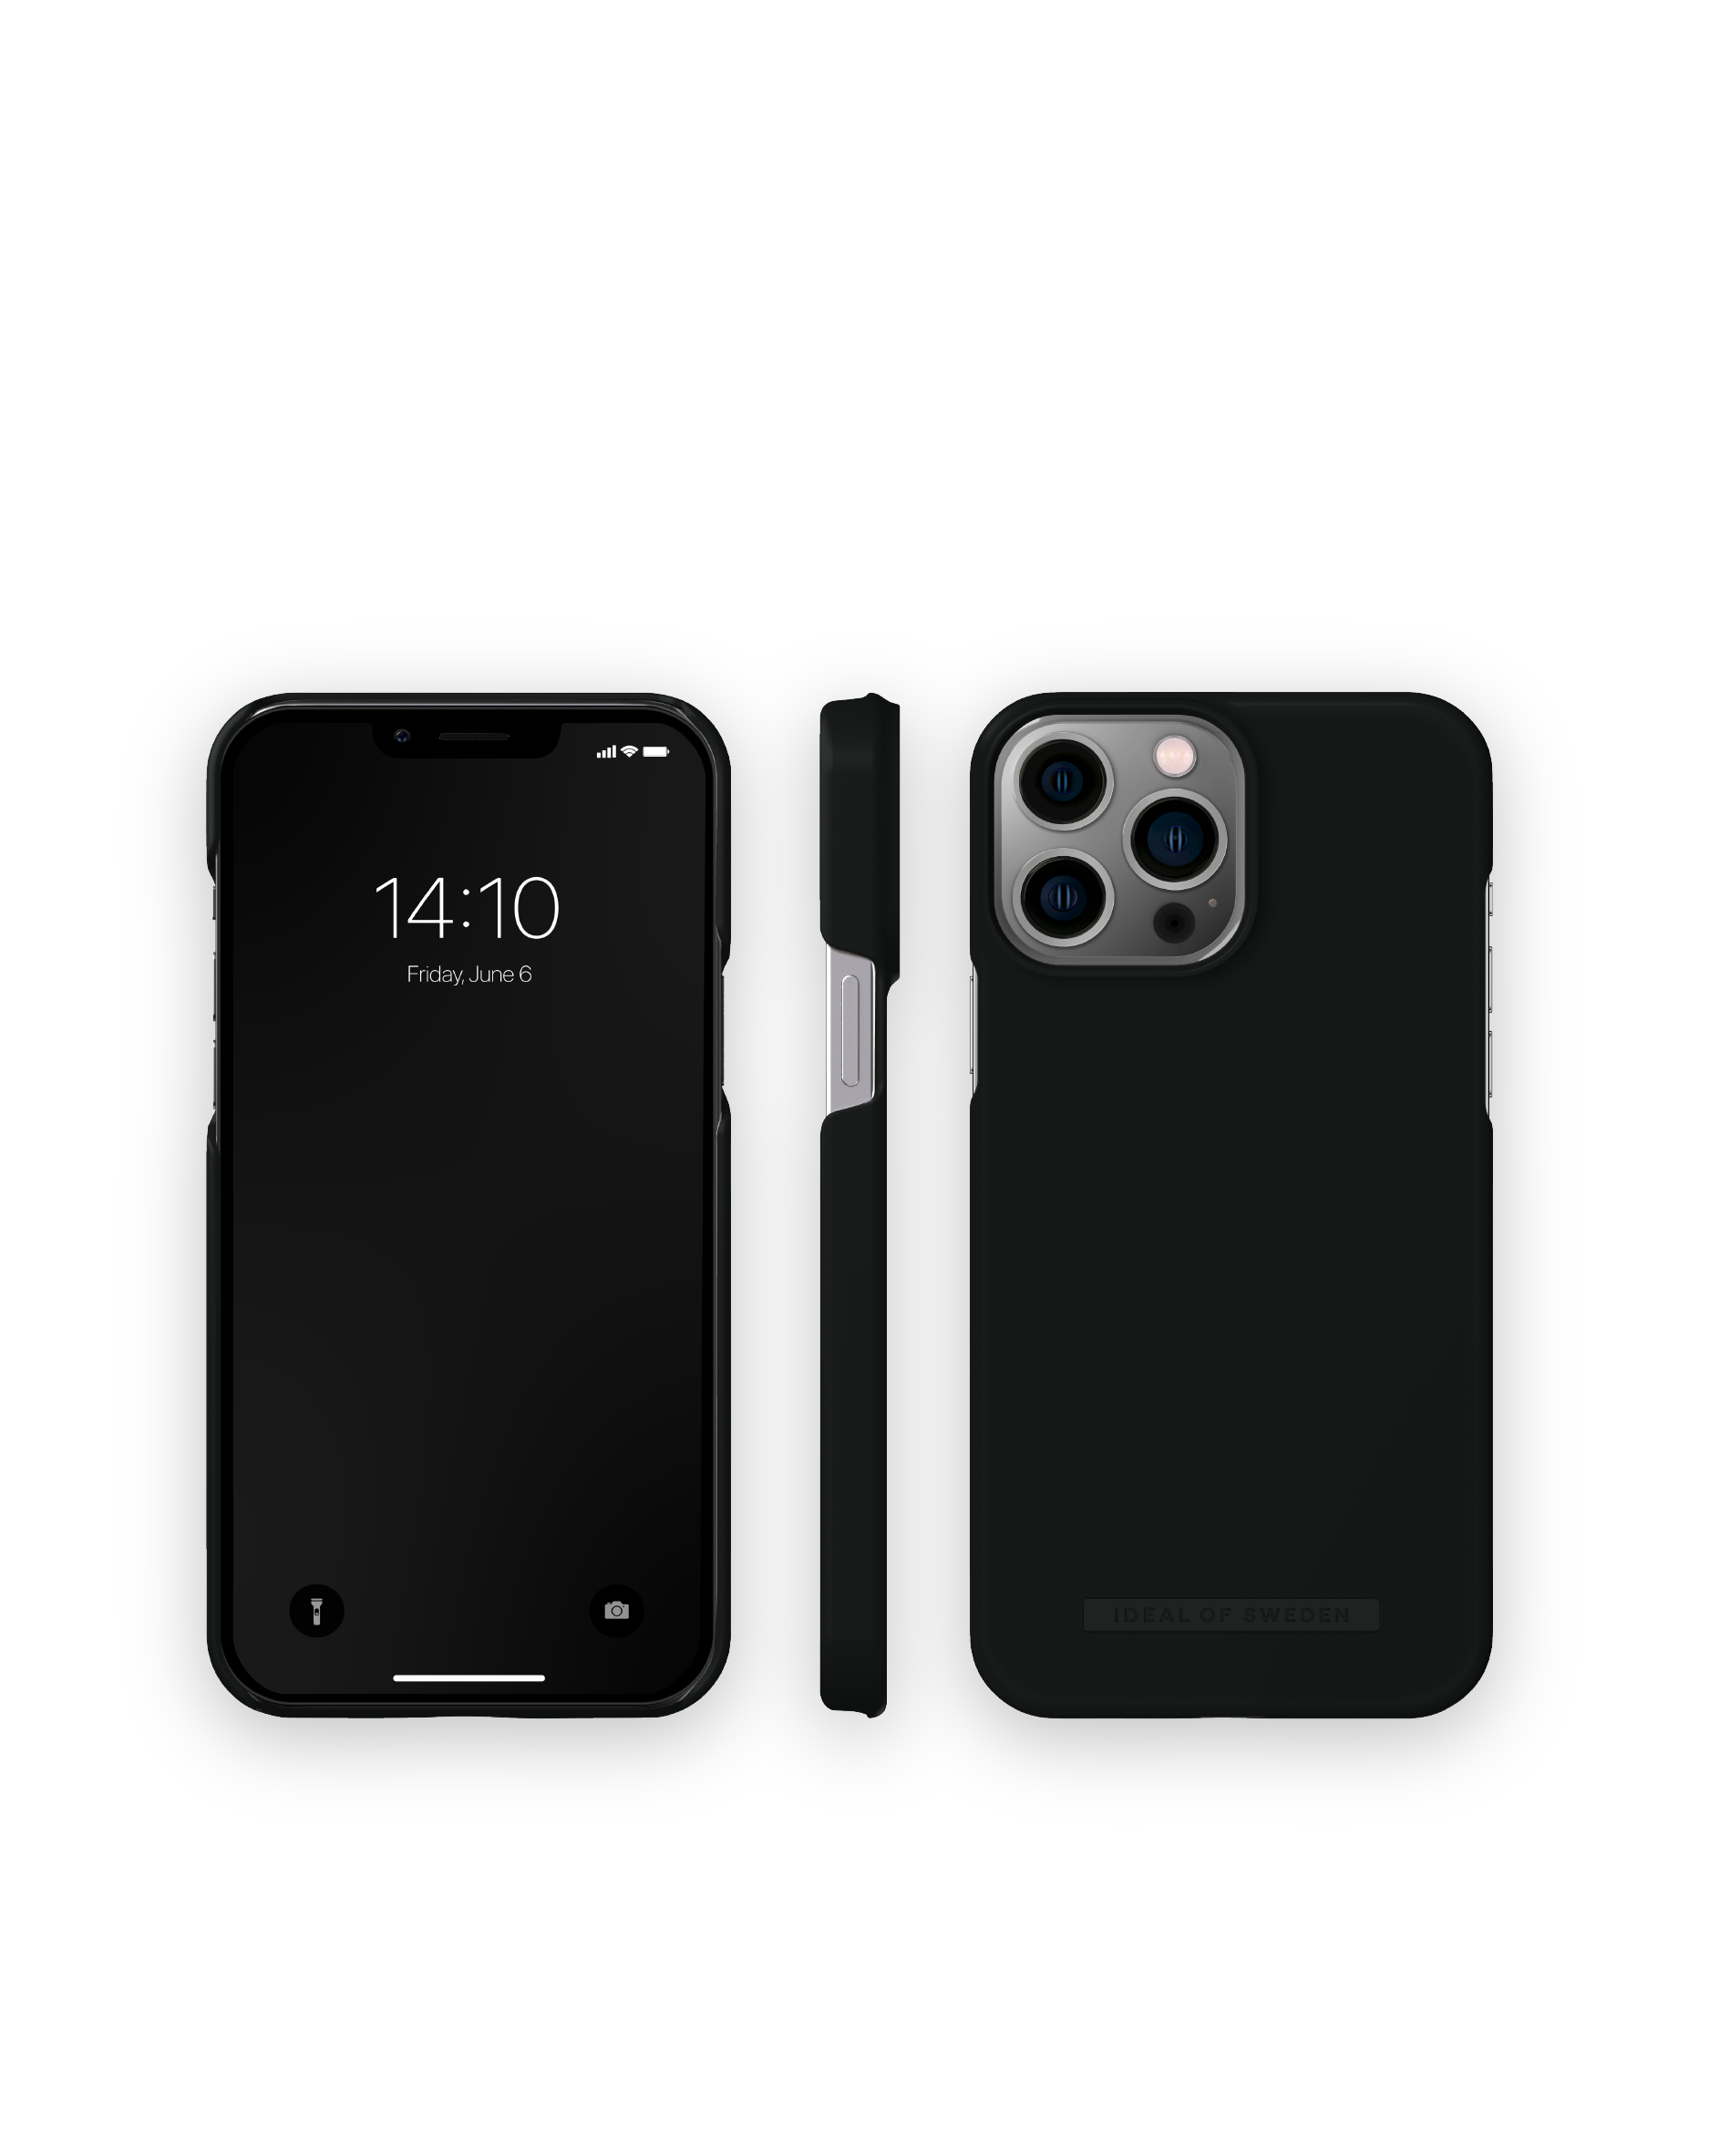 Backcover, OF Max, SWEDEN 13 Coal IDEAL Pro Black IDFCSS22-I2167-407, iPhone Apple,